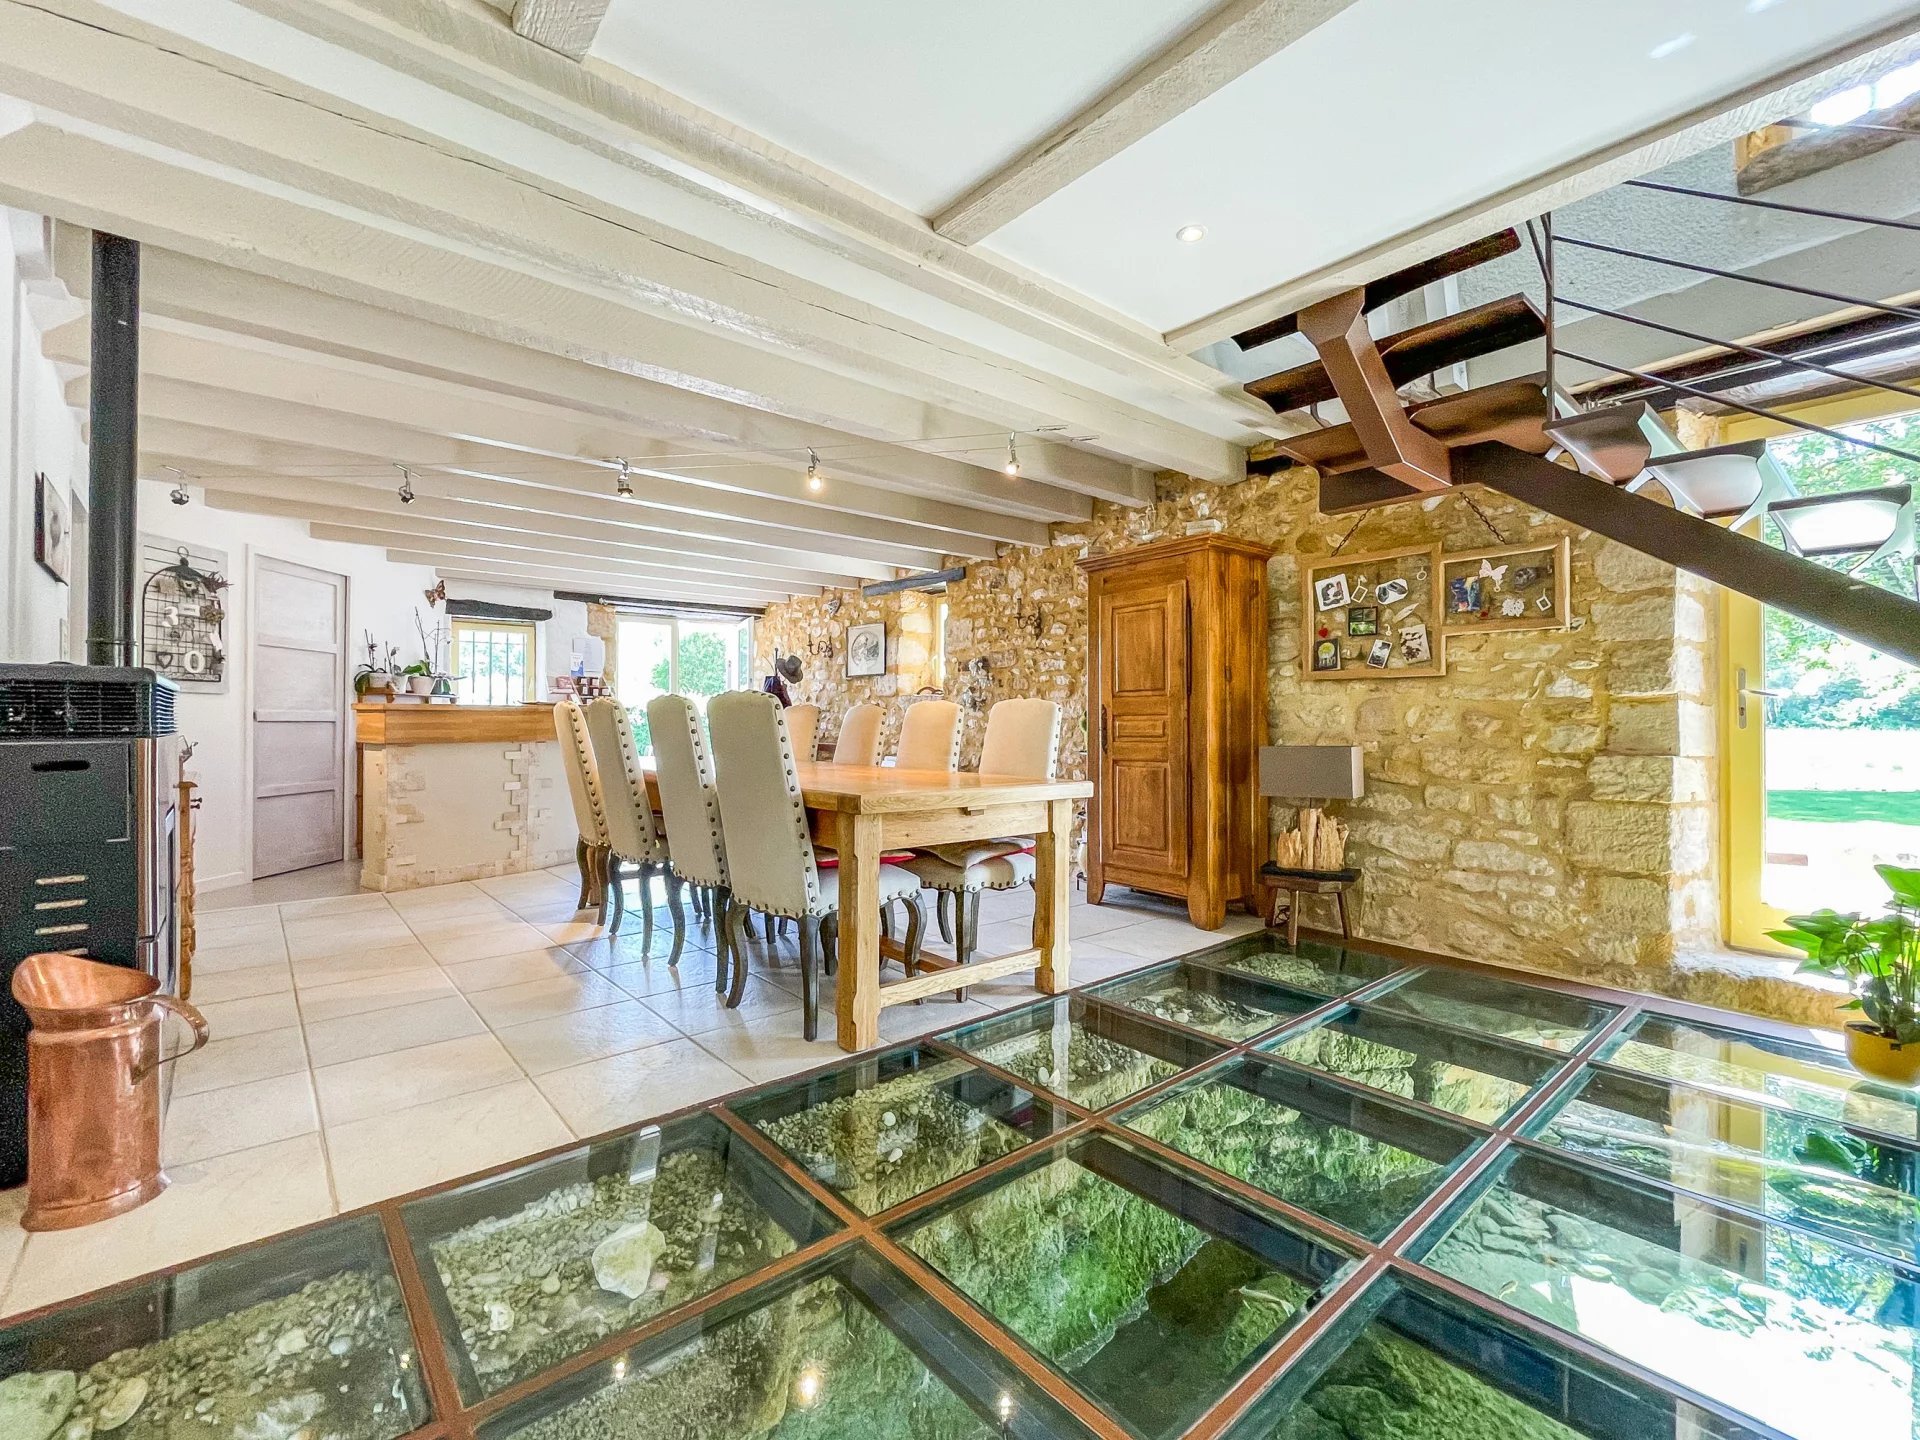 Gorgeous mill house with aquarium floor WOW!